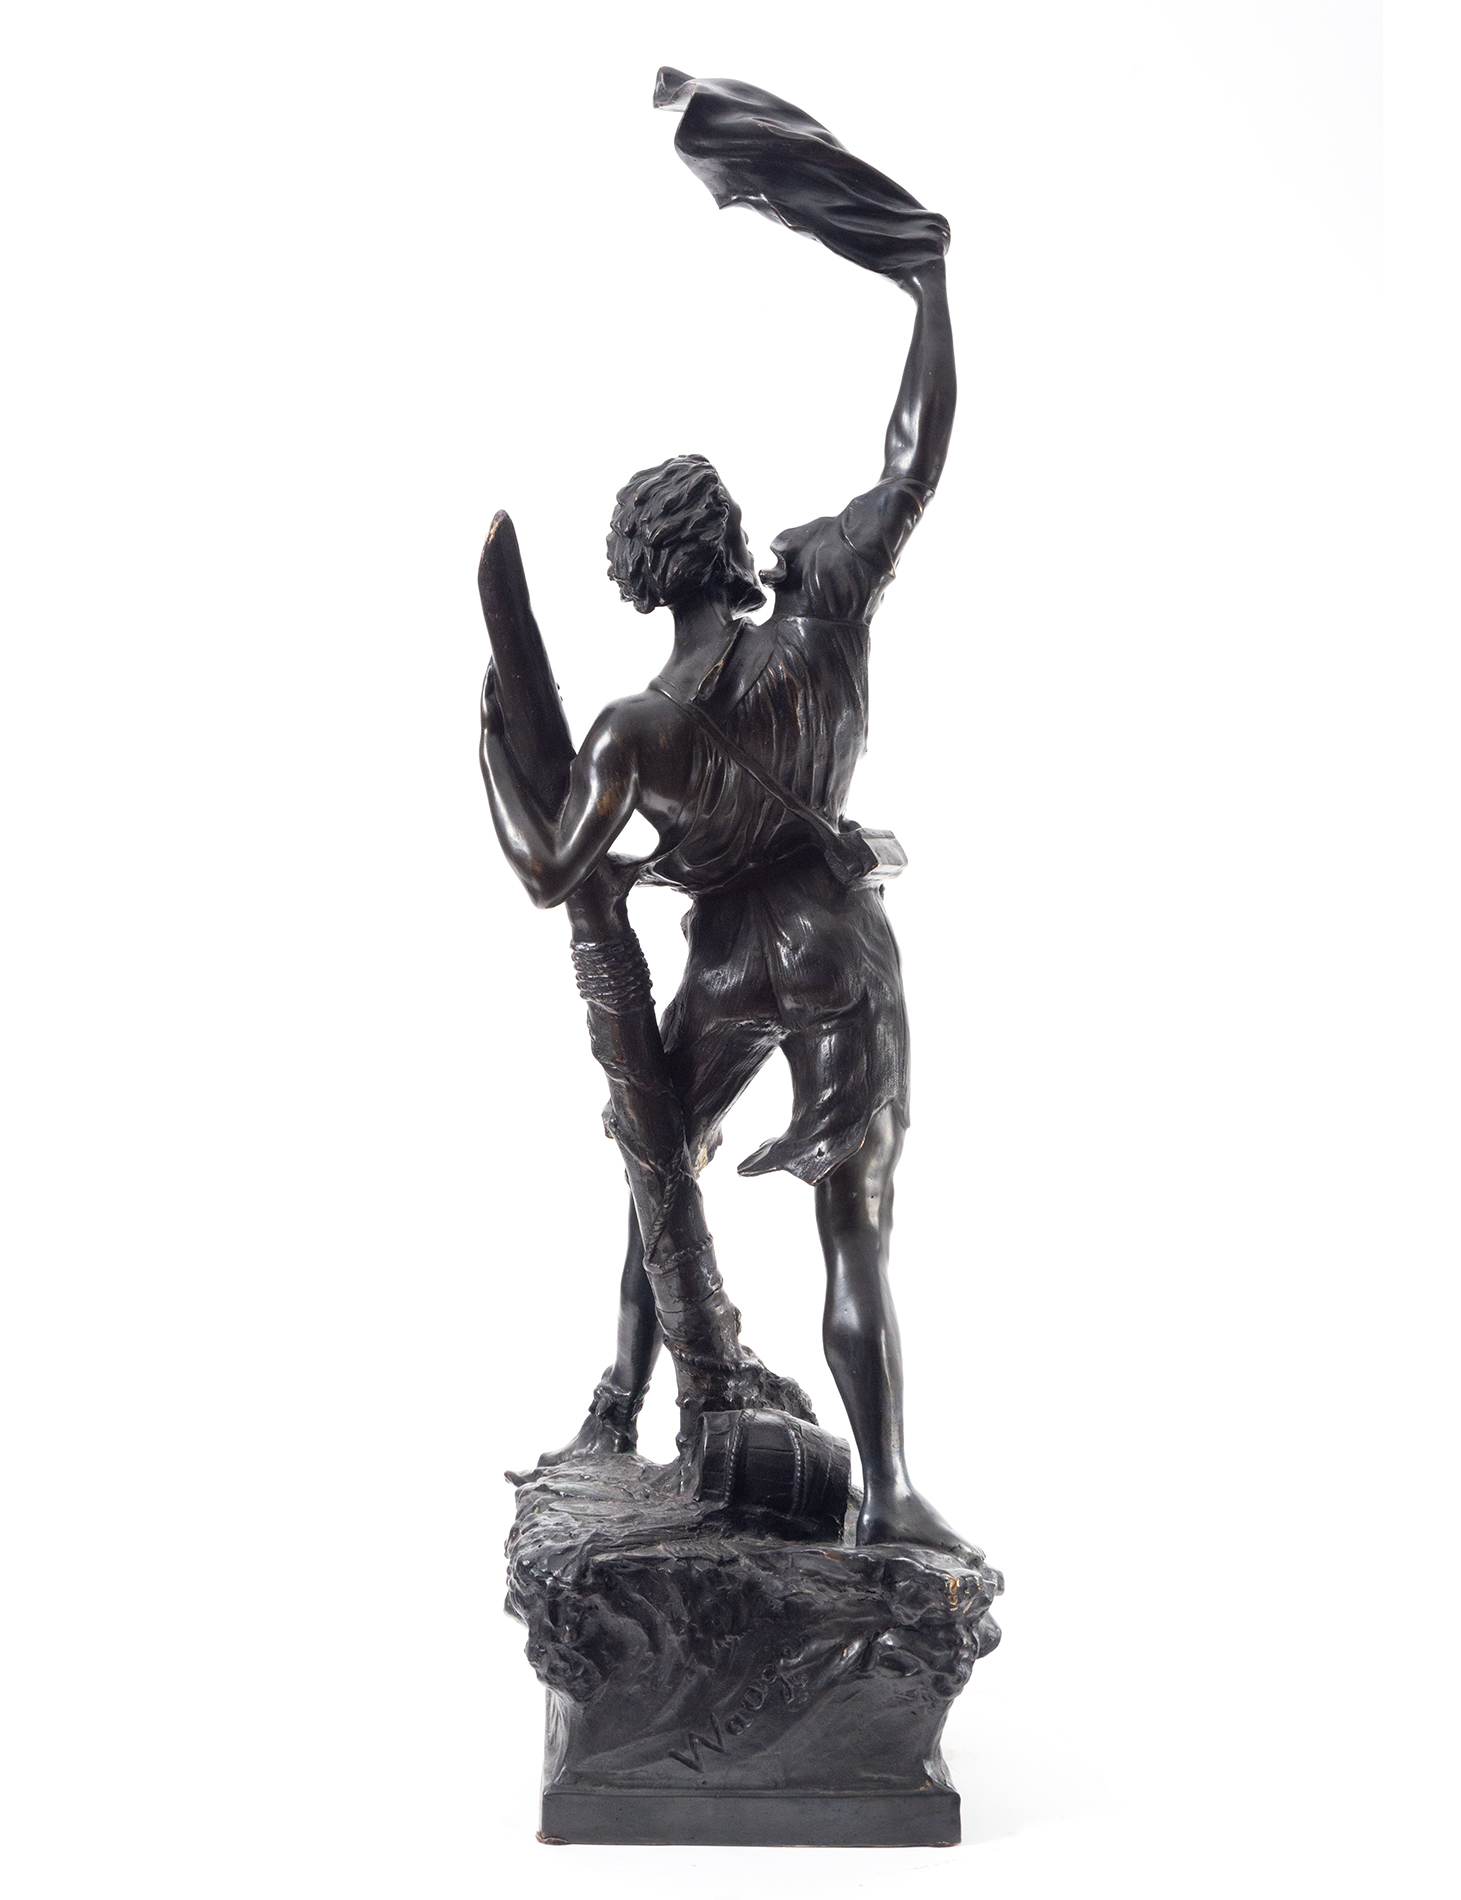 Detresse, castaway figure in patinated bronze, German school from the beginning of the 20th century - Image 7 of 7